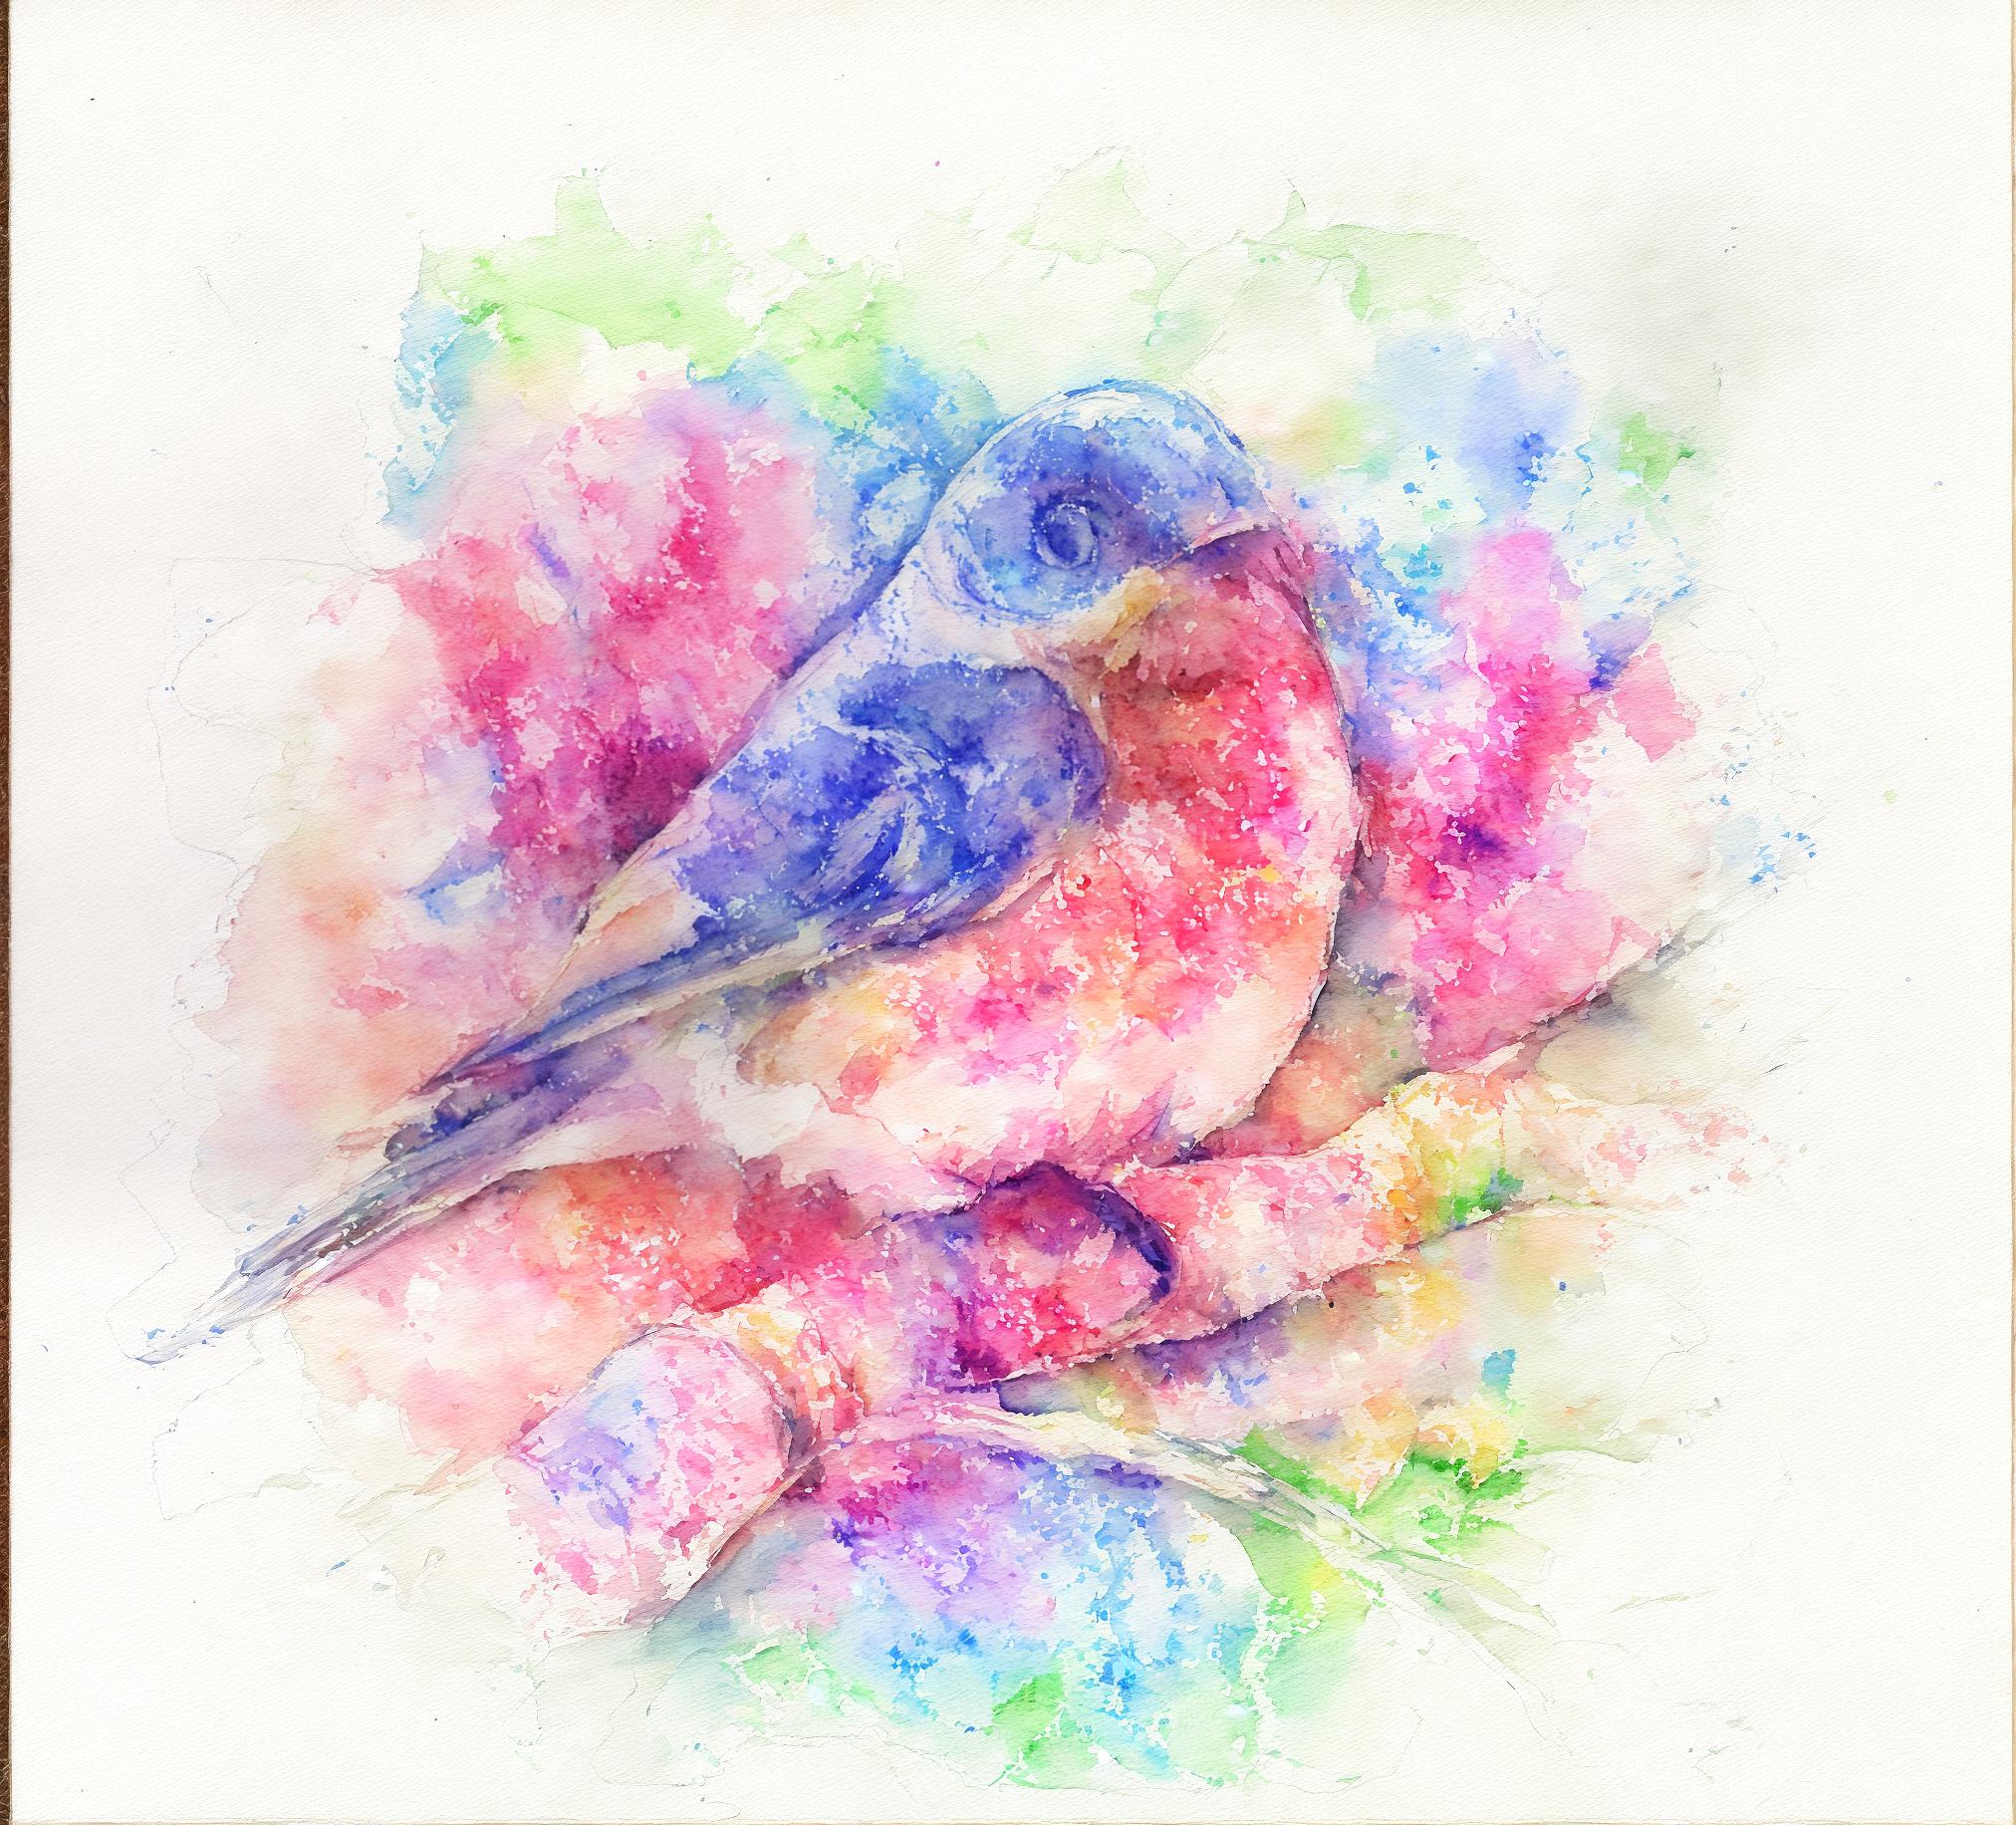  watercolor painting